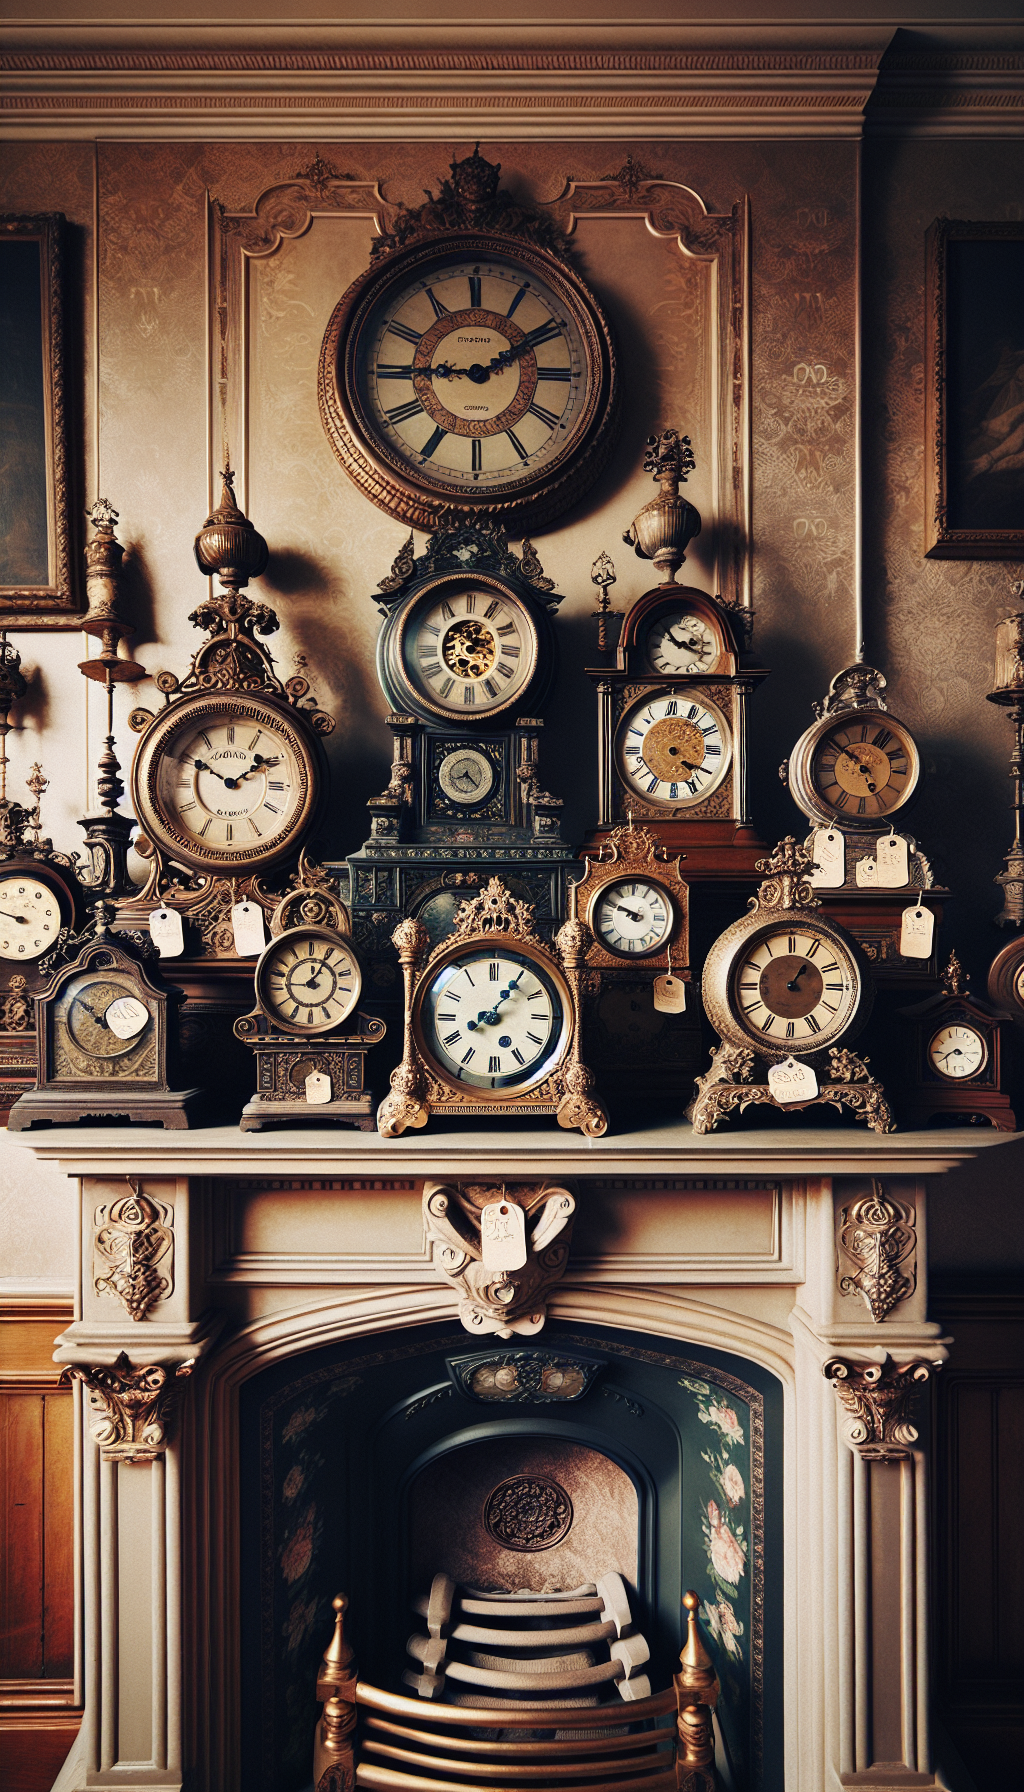 In a lavish Victorian drawing room, a grandiose mantel adorned with an array of ornate antique clocks stands prominent. Each clock, styled from different historical periods, displays an intricate price tag that resembles a vintage label, subtly indicating its value. This eclectic fusion of timepieces evokes the bygone "Era of Elegance" and hints at their esteemed worth.